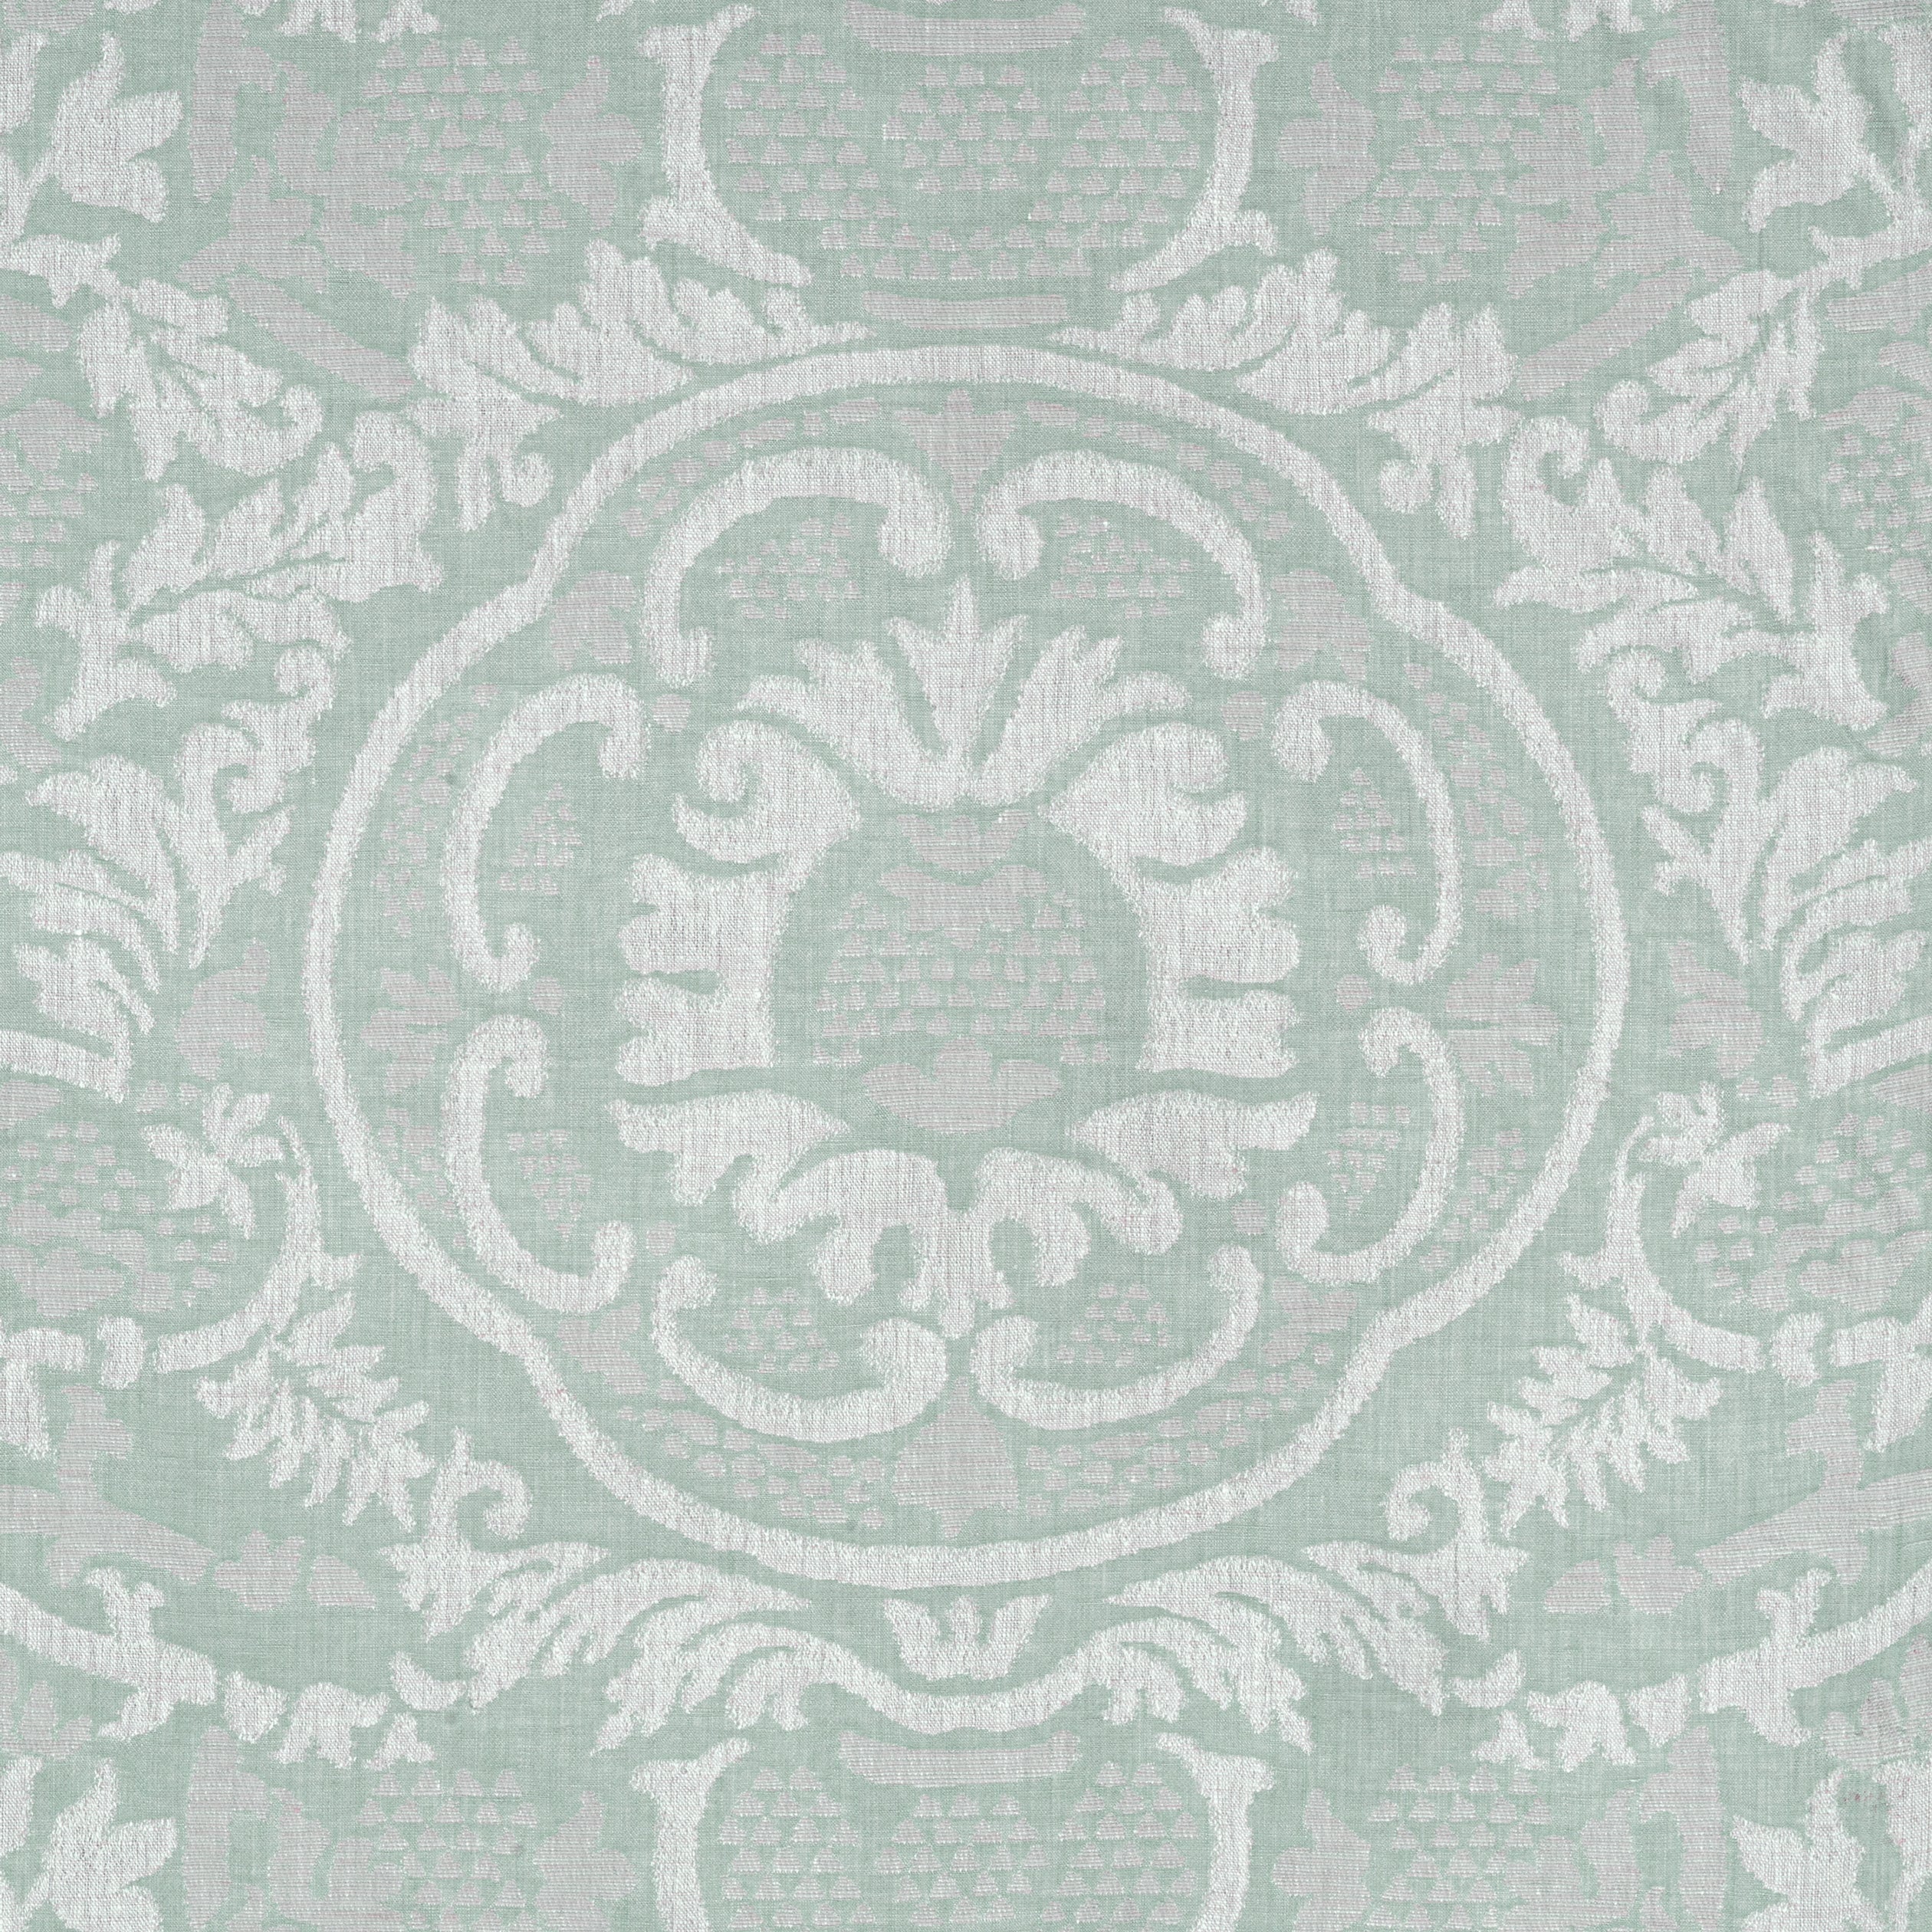 Earl Damask fabric in robins egg color - pattern number W710839 - by Thibaut in the Heritage collection